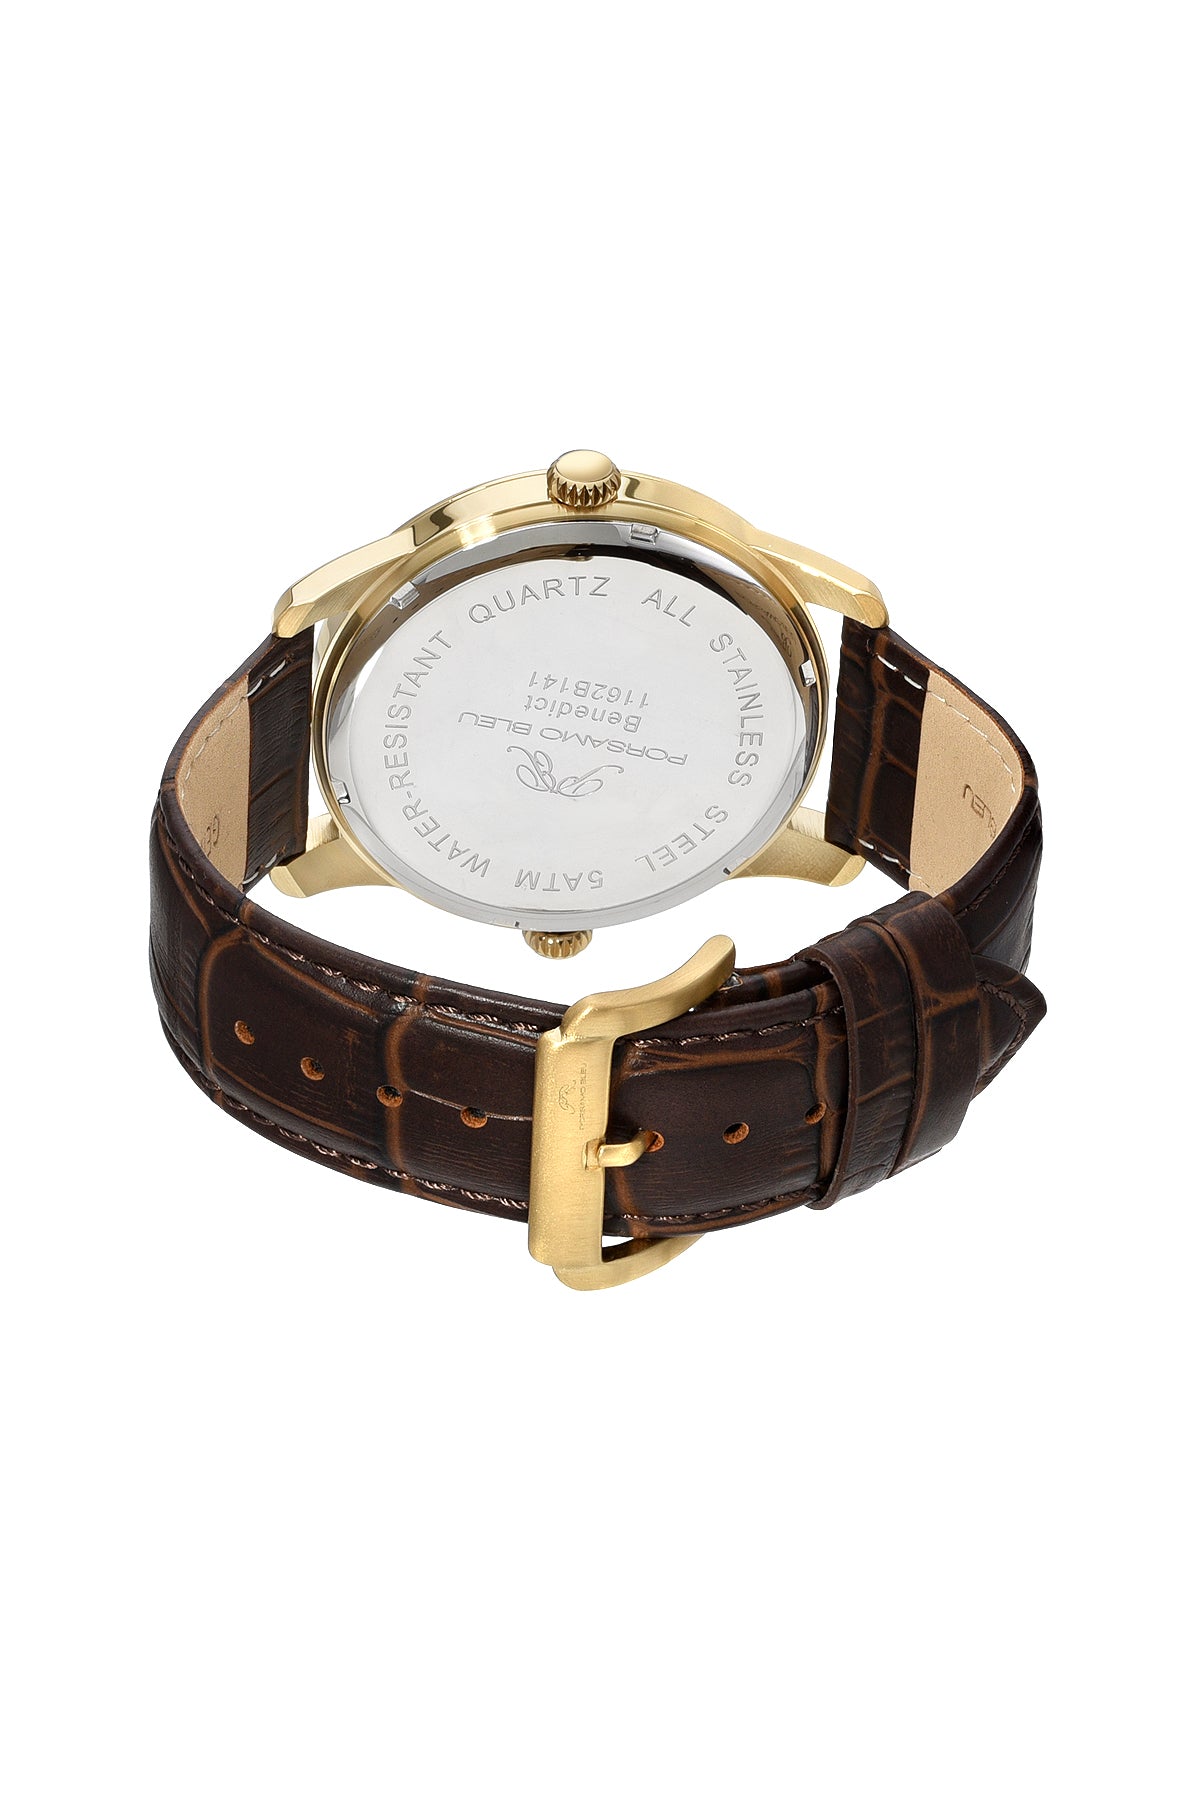 Porsamo Bleu Benedict Luxury Two Movements Men's Genuine Leather Band Watch, Gold, Brown 1162BBEL